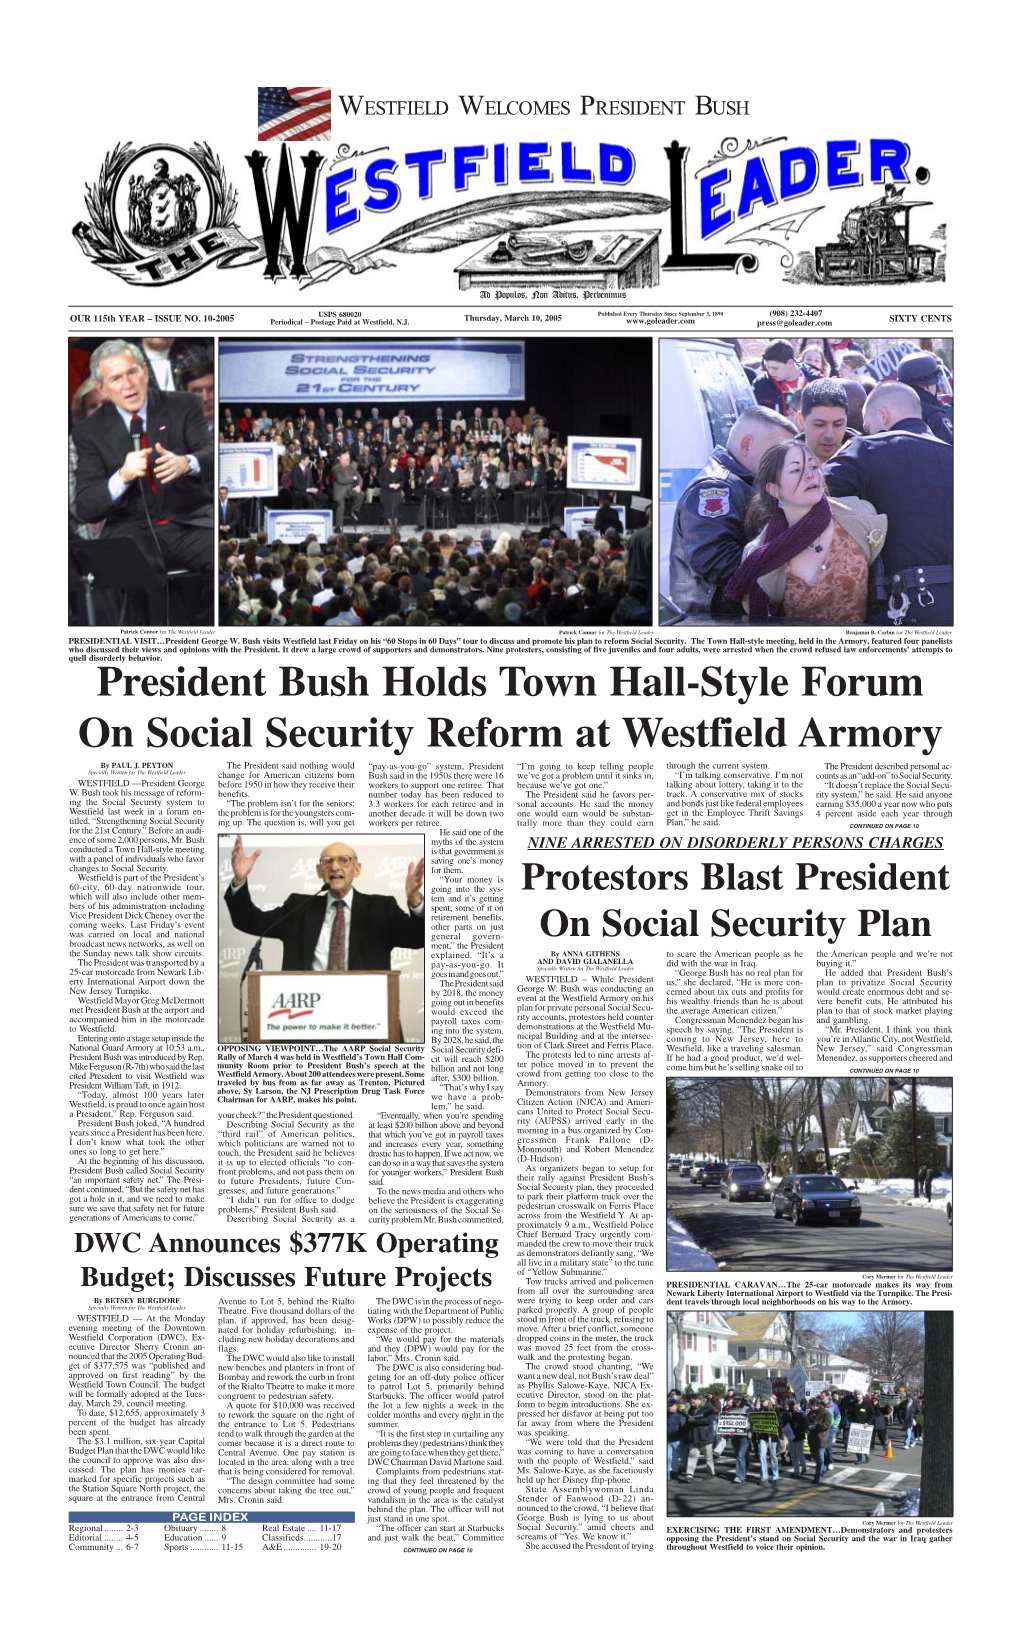 President Bush Holds Town Hall-Style Forum on Social Security Reform at Westfield Armory by PAUL J